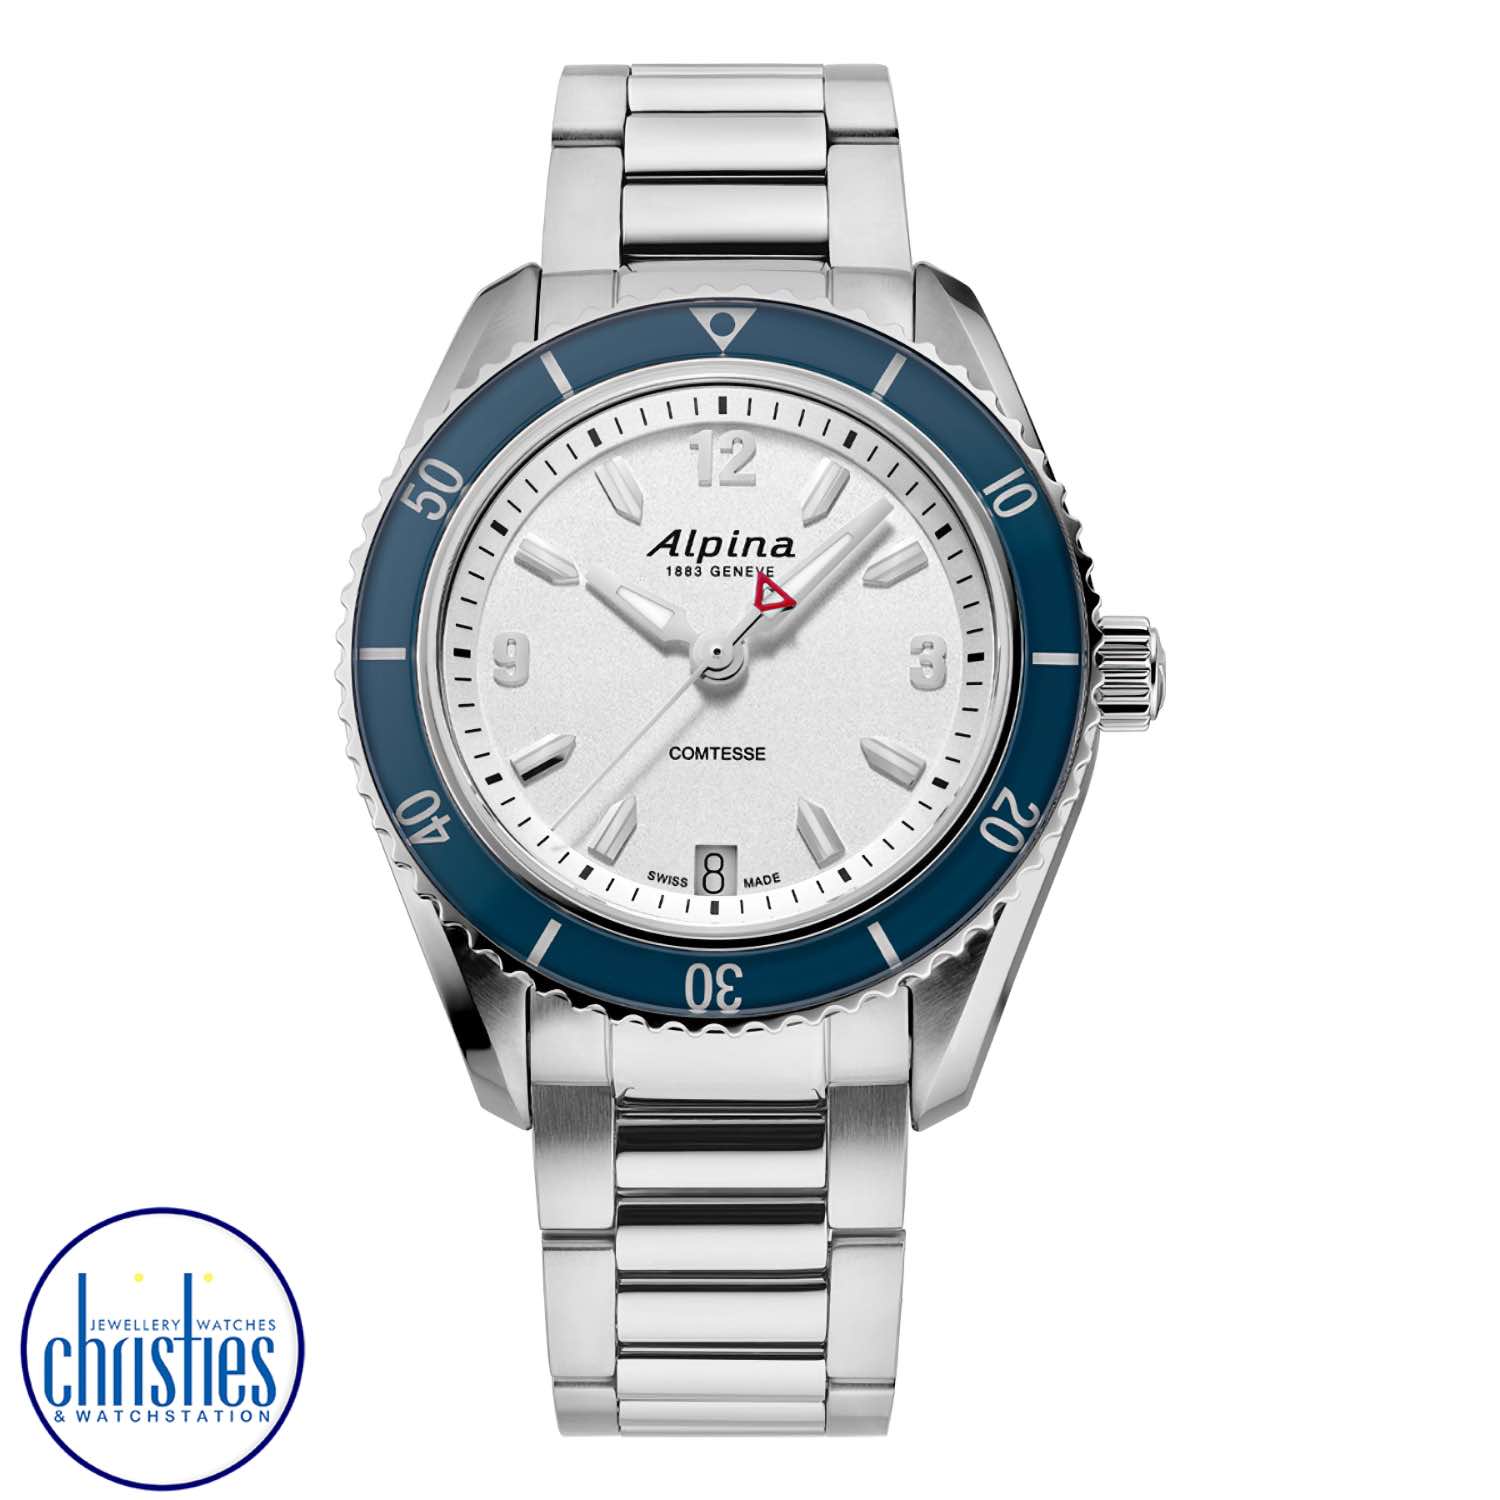 Alpina Comtesse Sport Quartz AL-240S3NC6B. From the very beginning, as far back as 1883, Alpina has been associated with horological innovation.